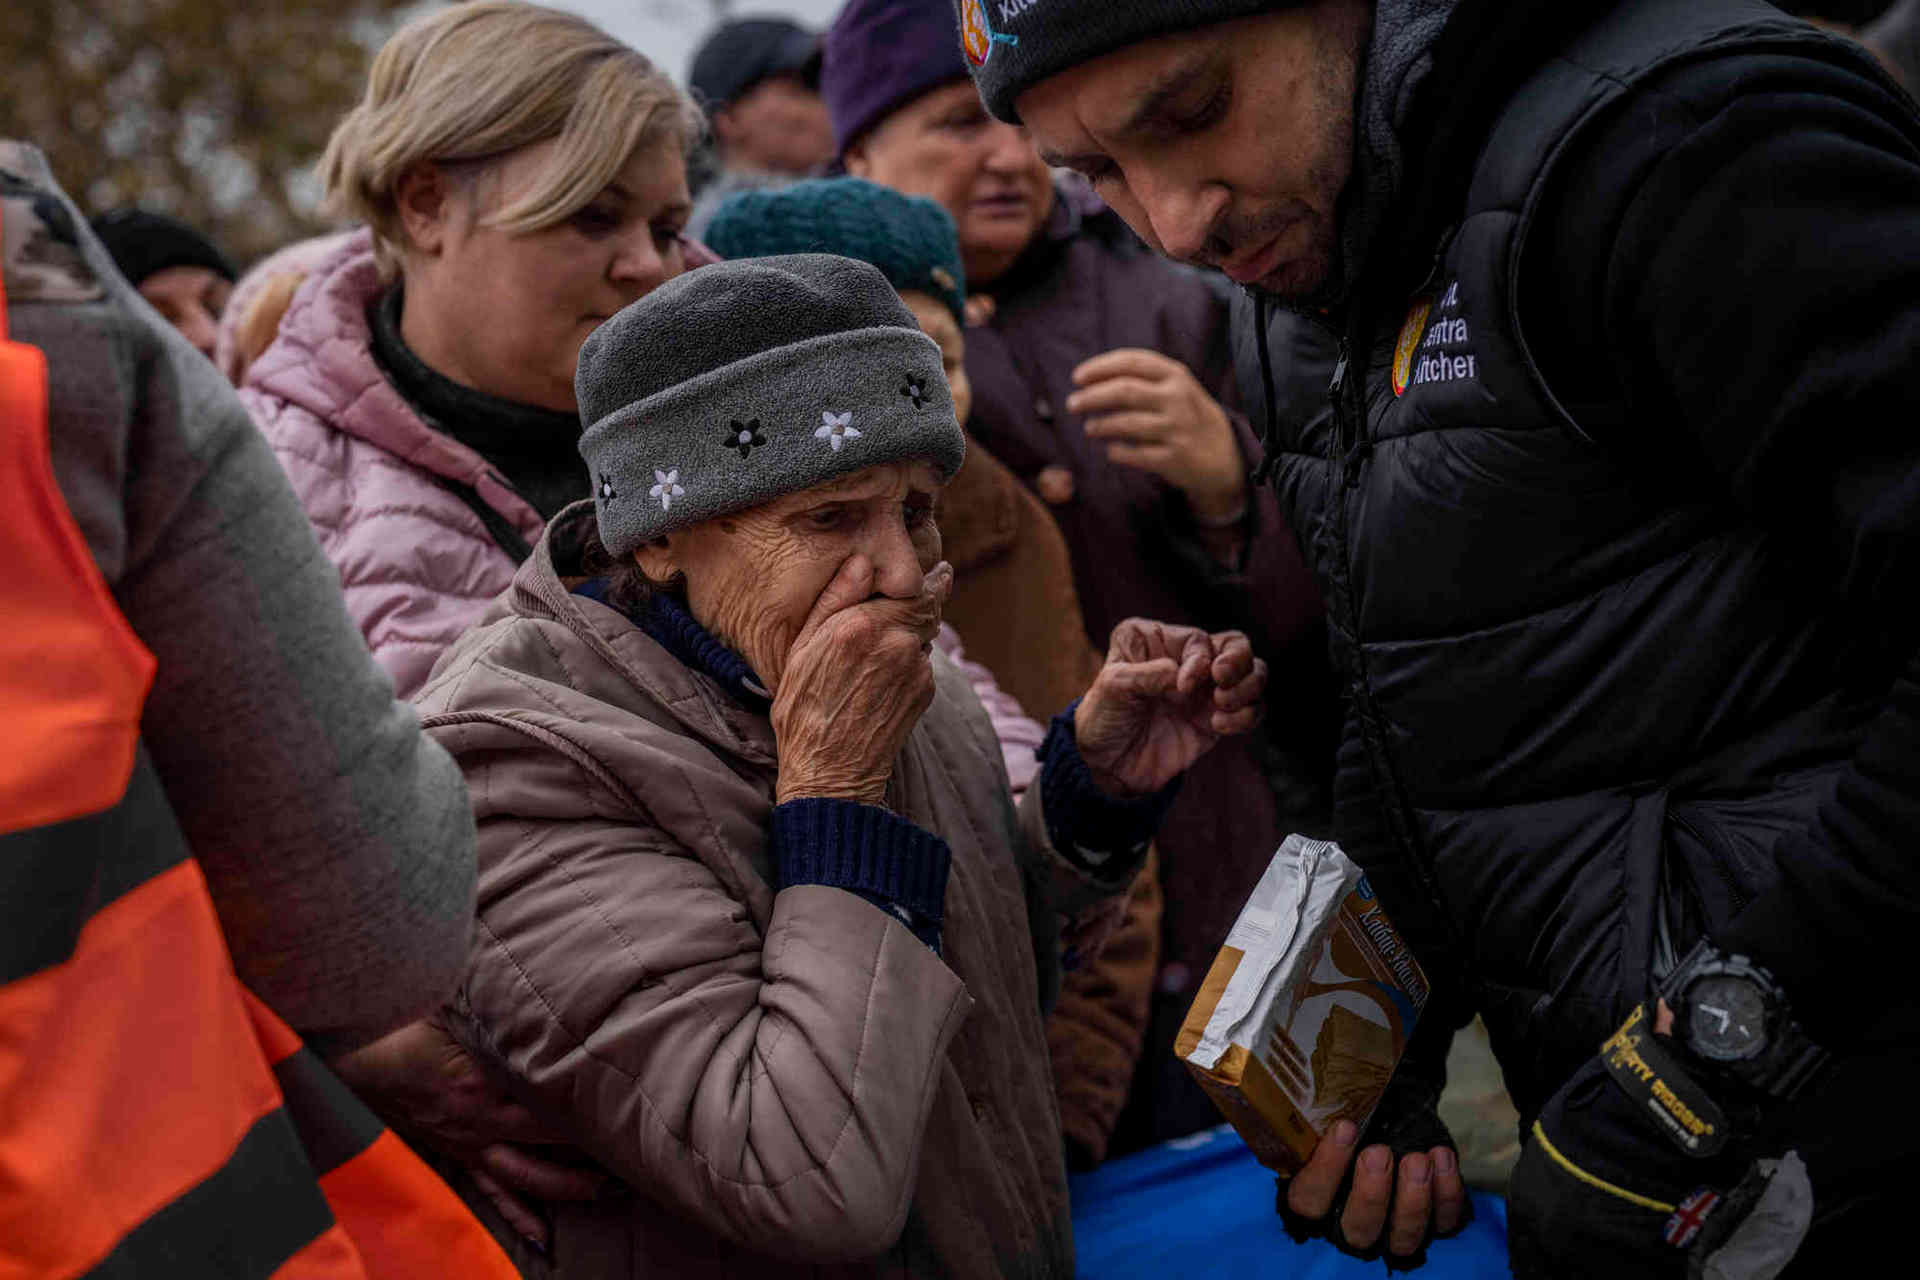 A woman reacts after receiving food donations from World Central Kitchen in Kherson